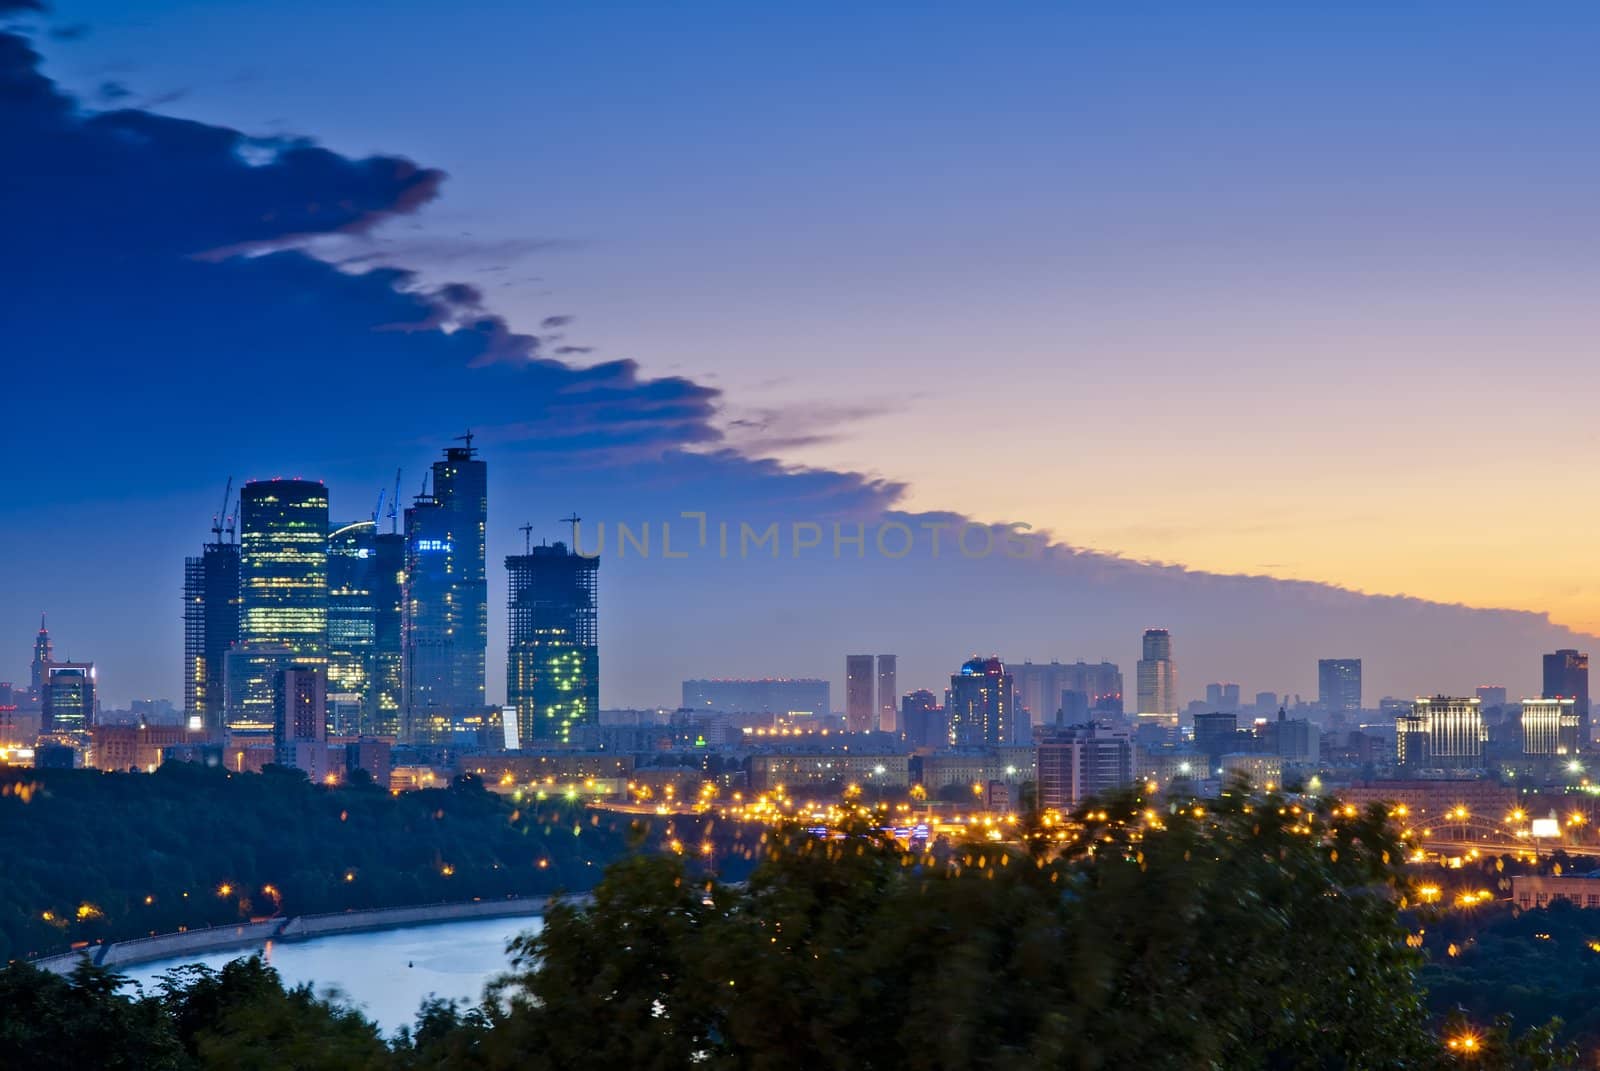 Evening Moscow City, the view from Sparrow Hills by kosmsos111